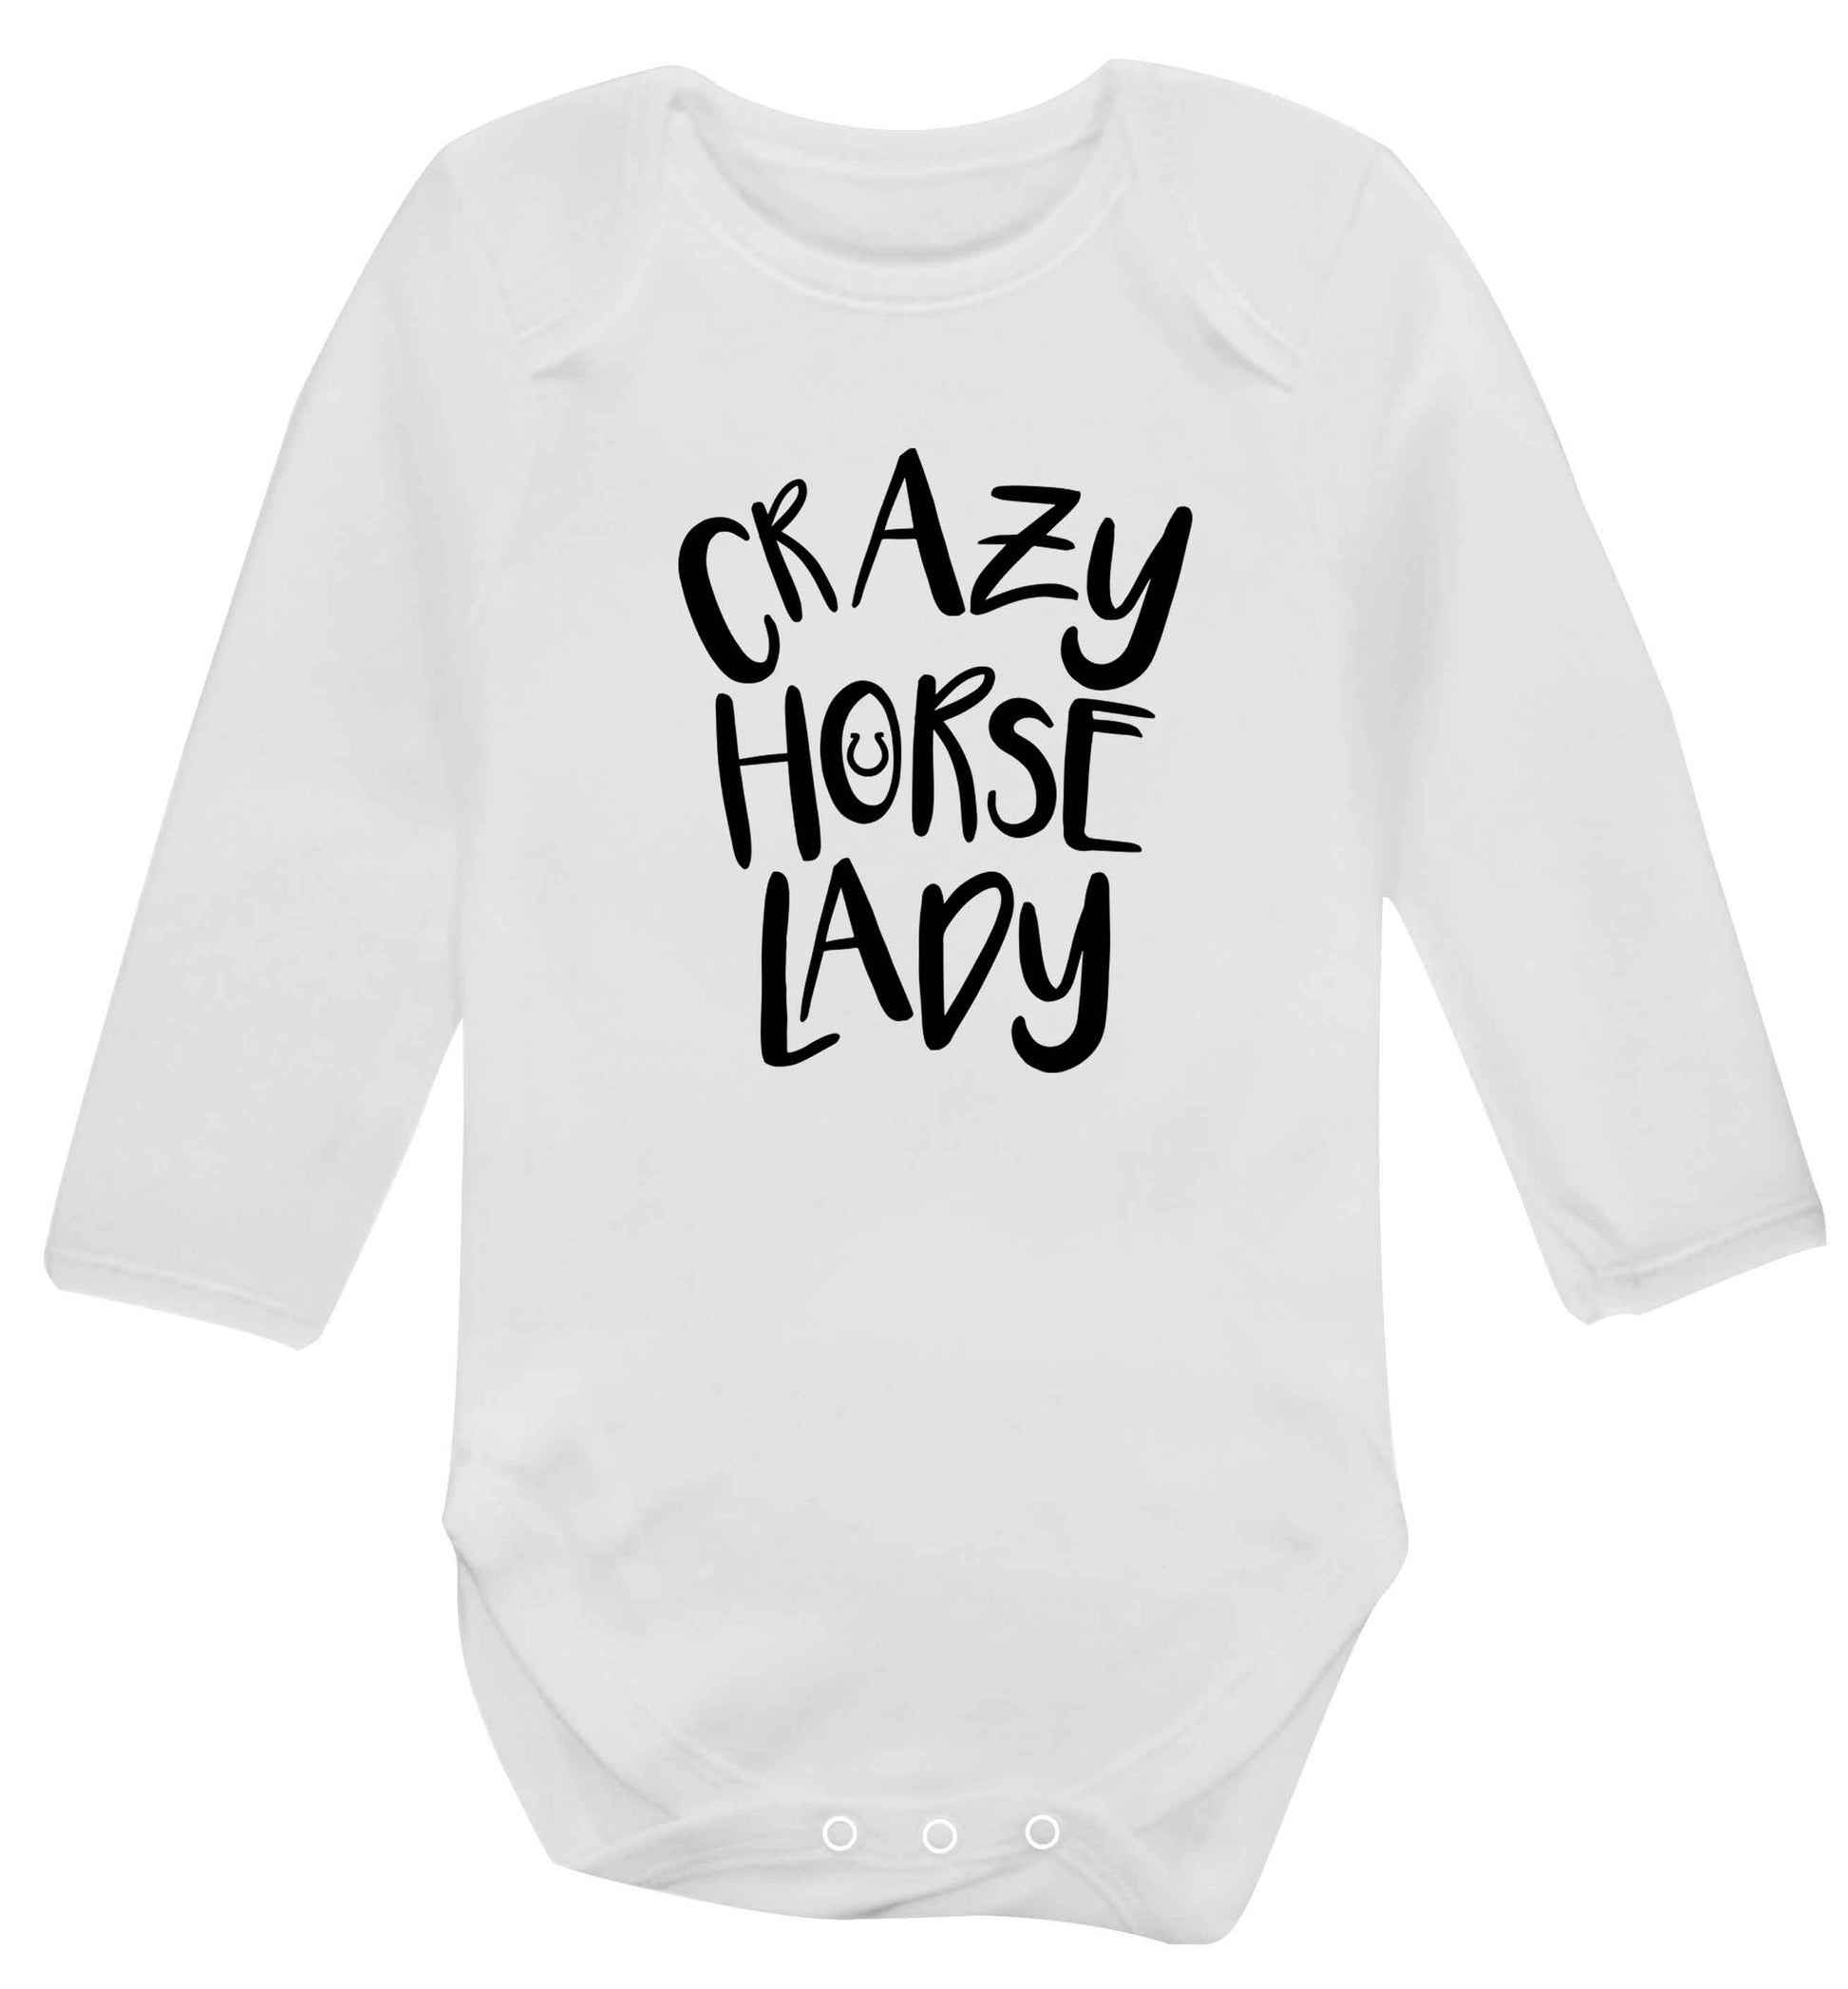 Crazy horse lady baby vest long sleeved white 6-12 months